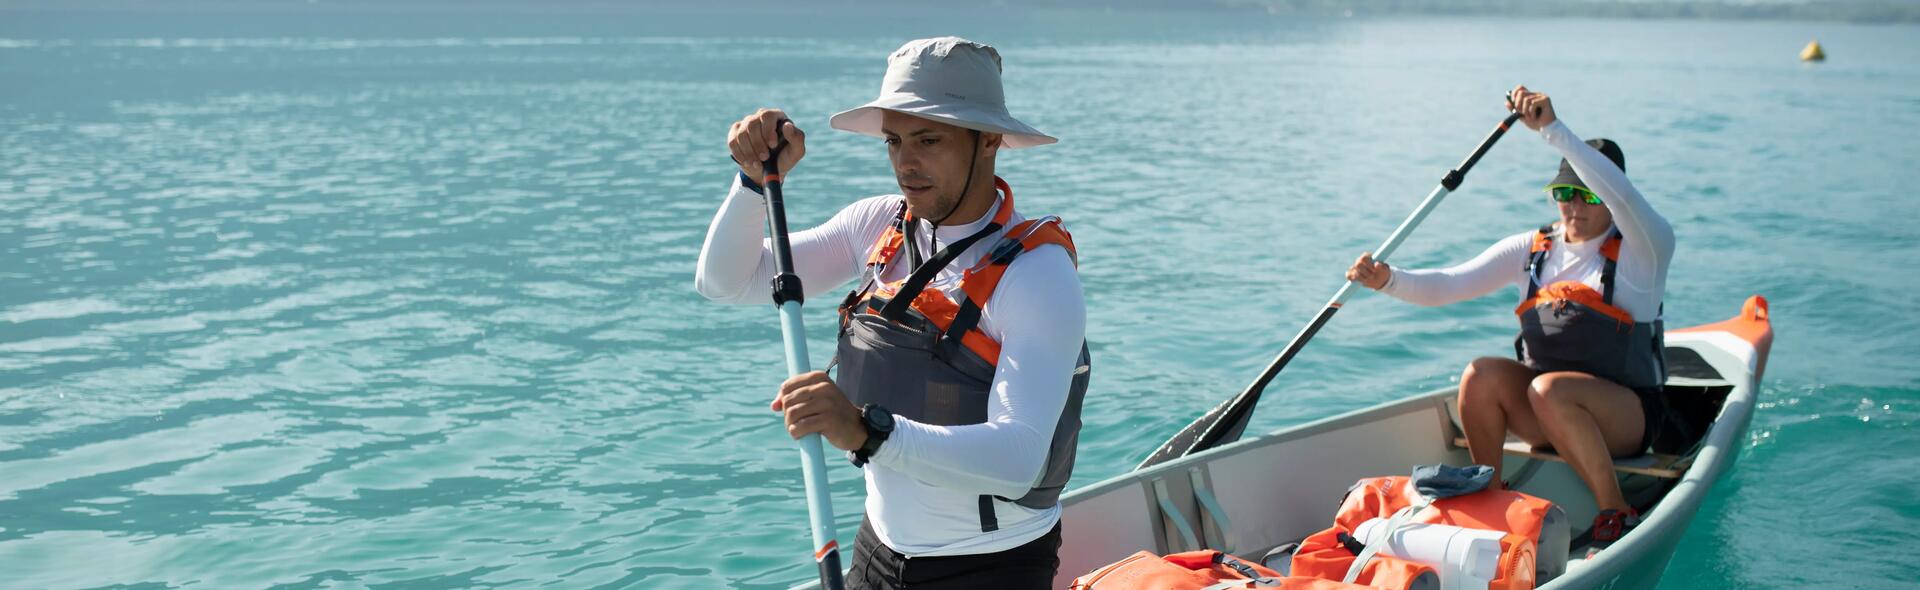 How to choose kayaking clothes